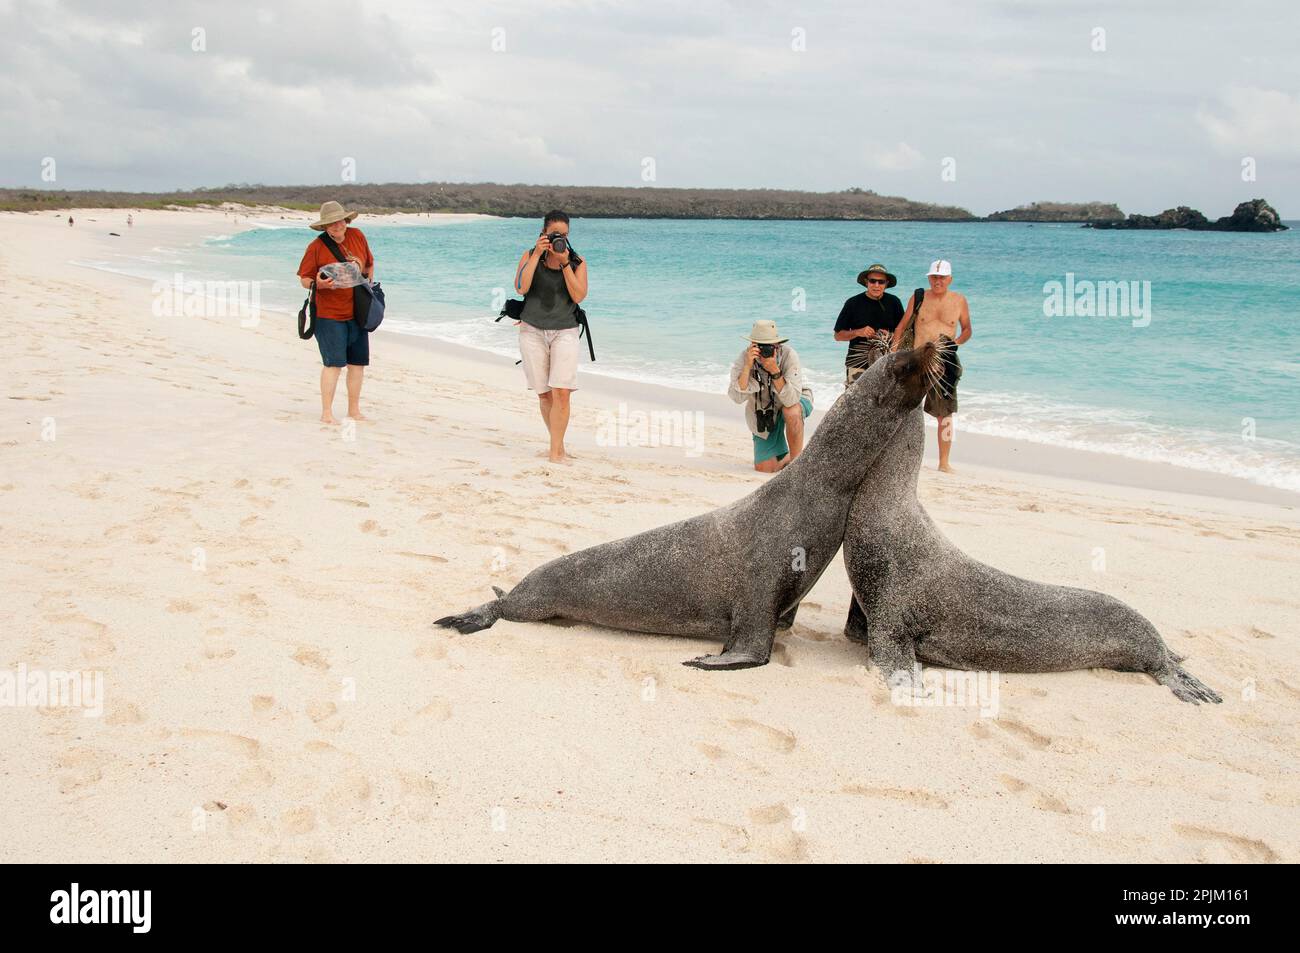 Two Galapagos sea lions spar as tourists look on. (Editorial Use Only) Stock Photo